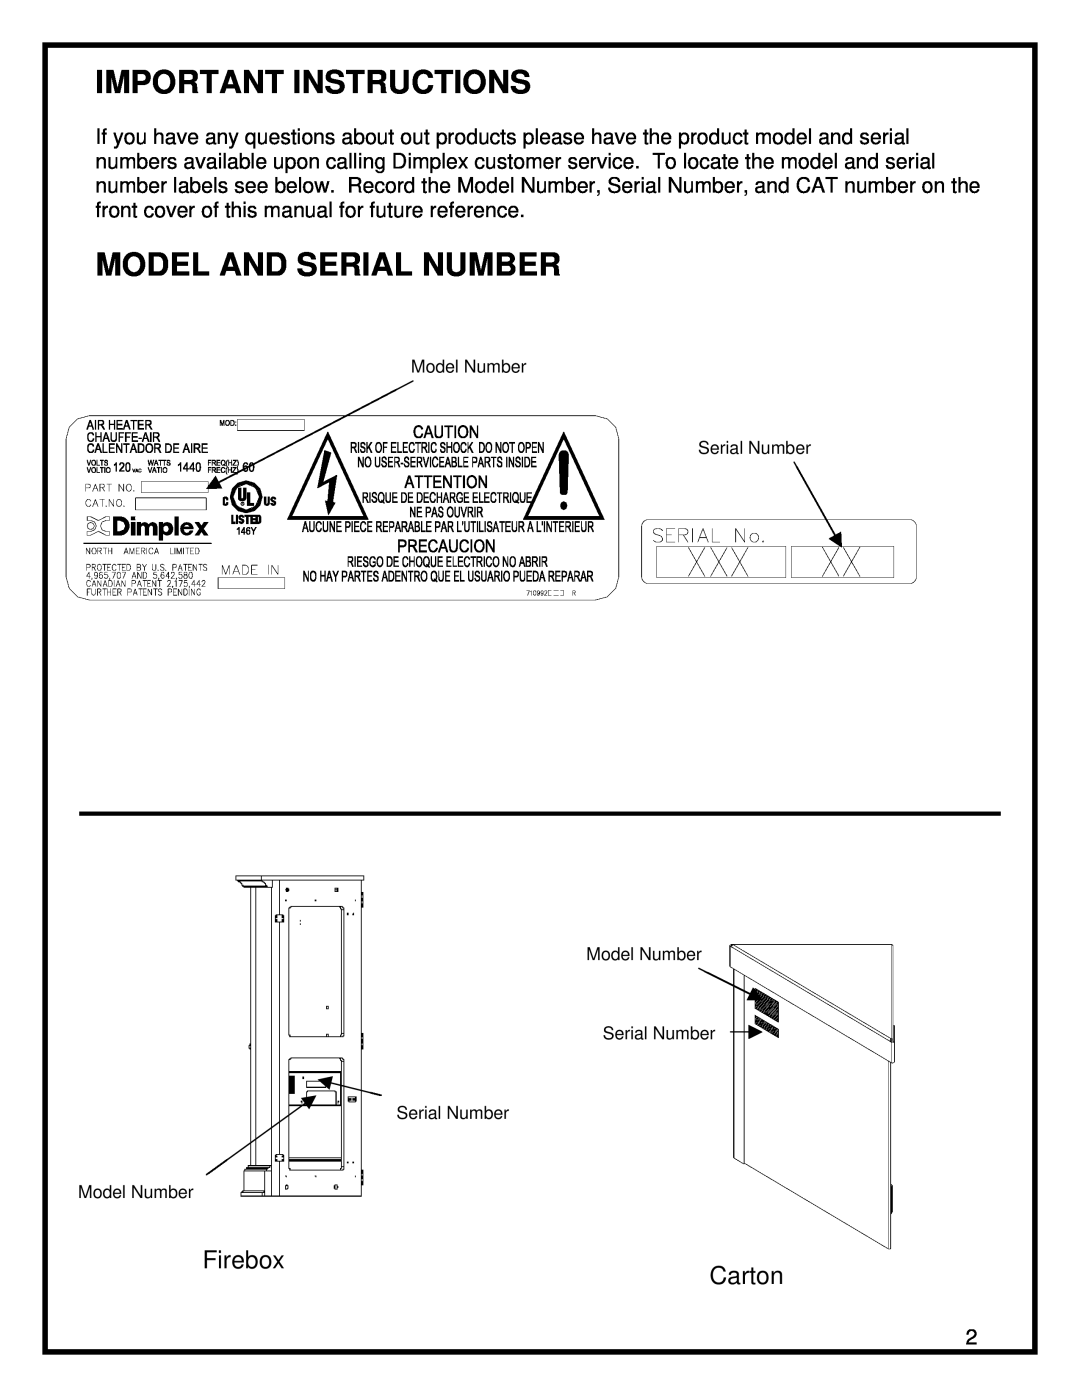 Dimplex Corner Standing Stove manual Important Instructions, Model And Serial Number, Firebox, Carton 